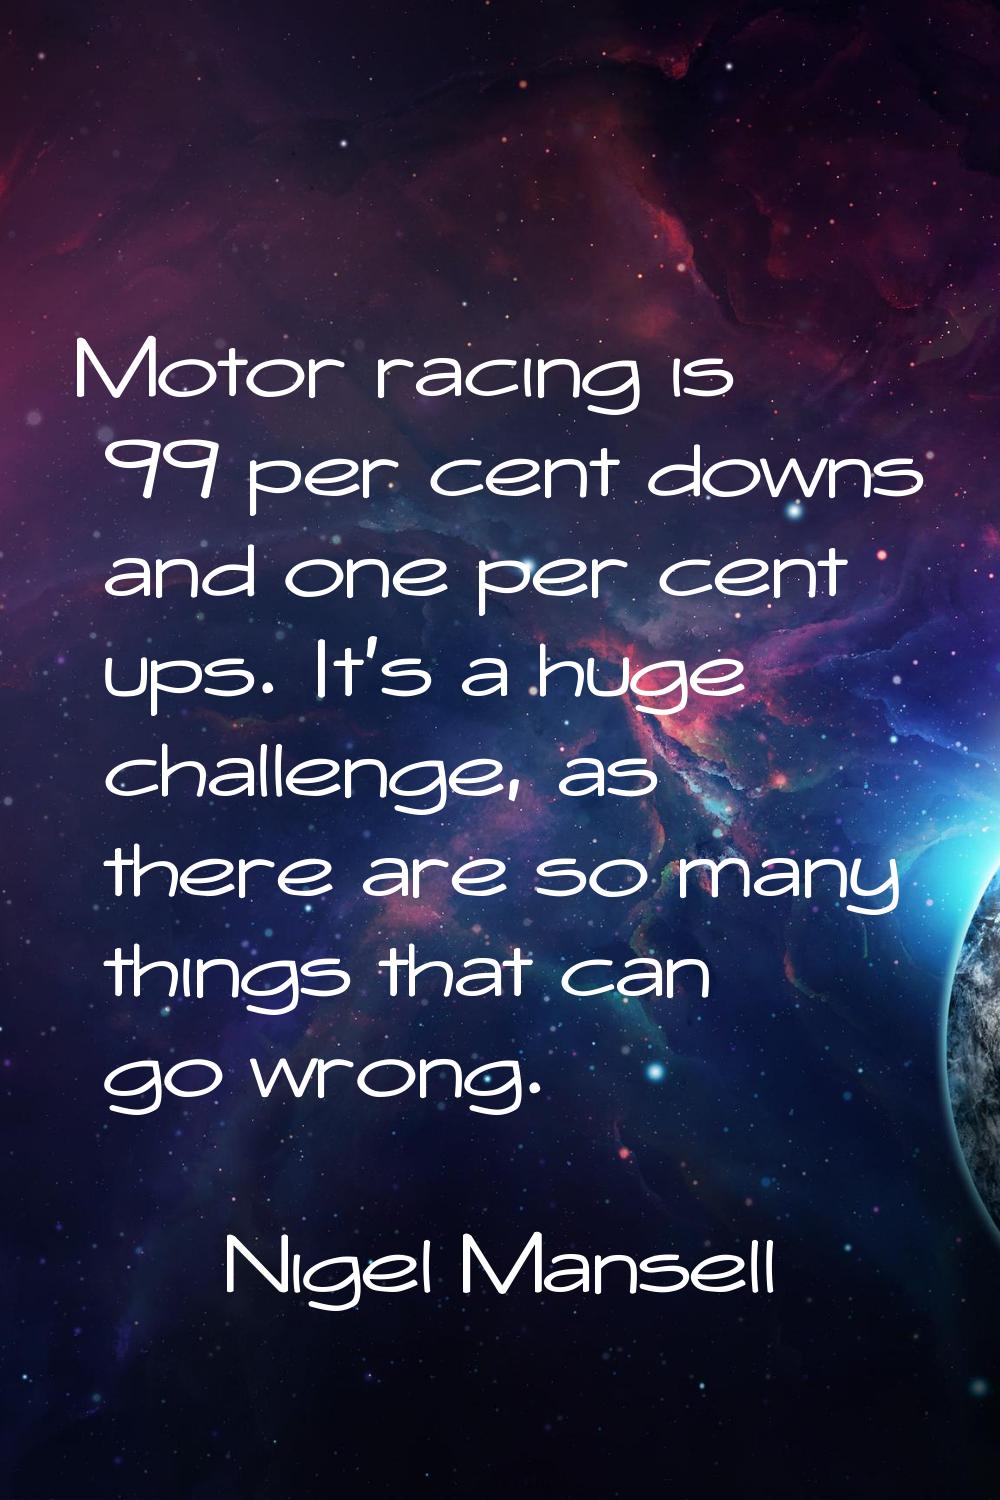 Motor racing is 99 per cent downs and one per cent ups. It's a huge challenge, as there are so many